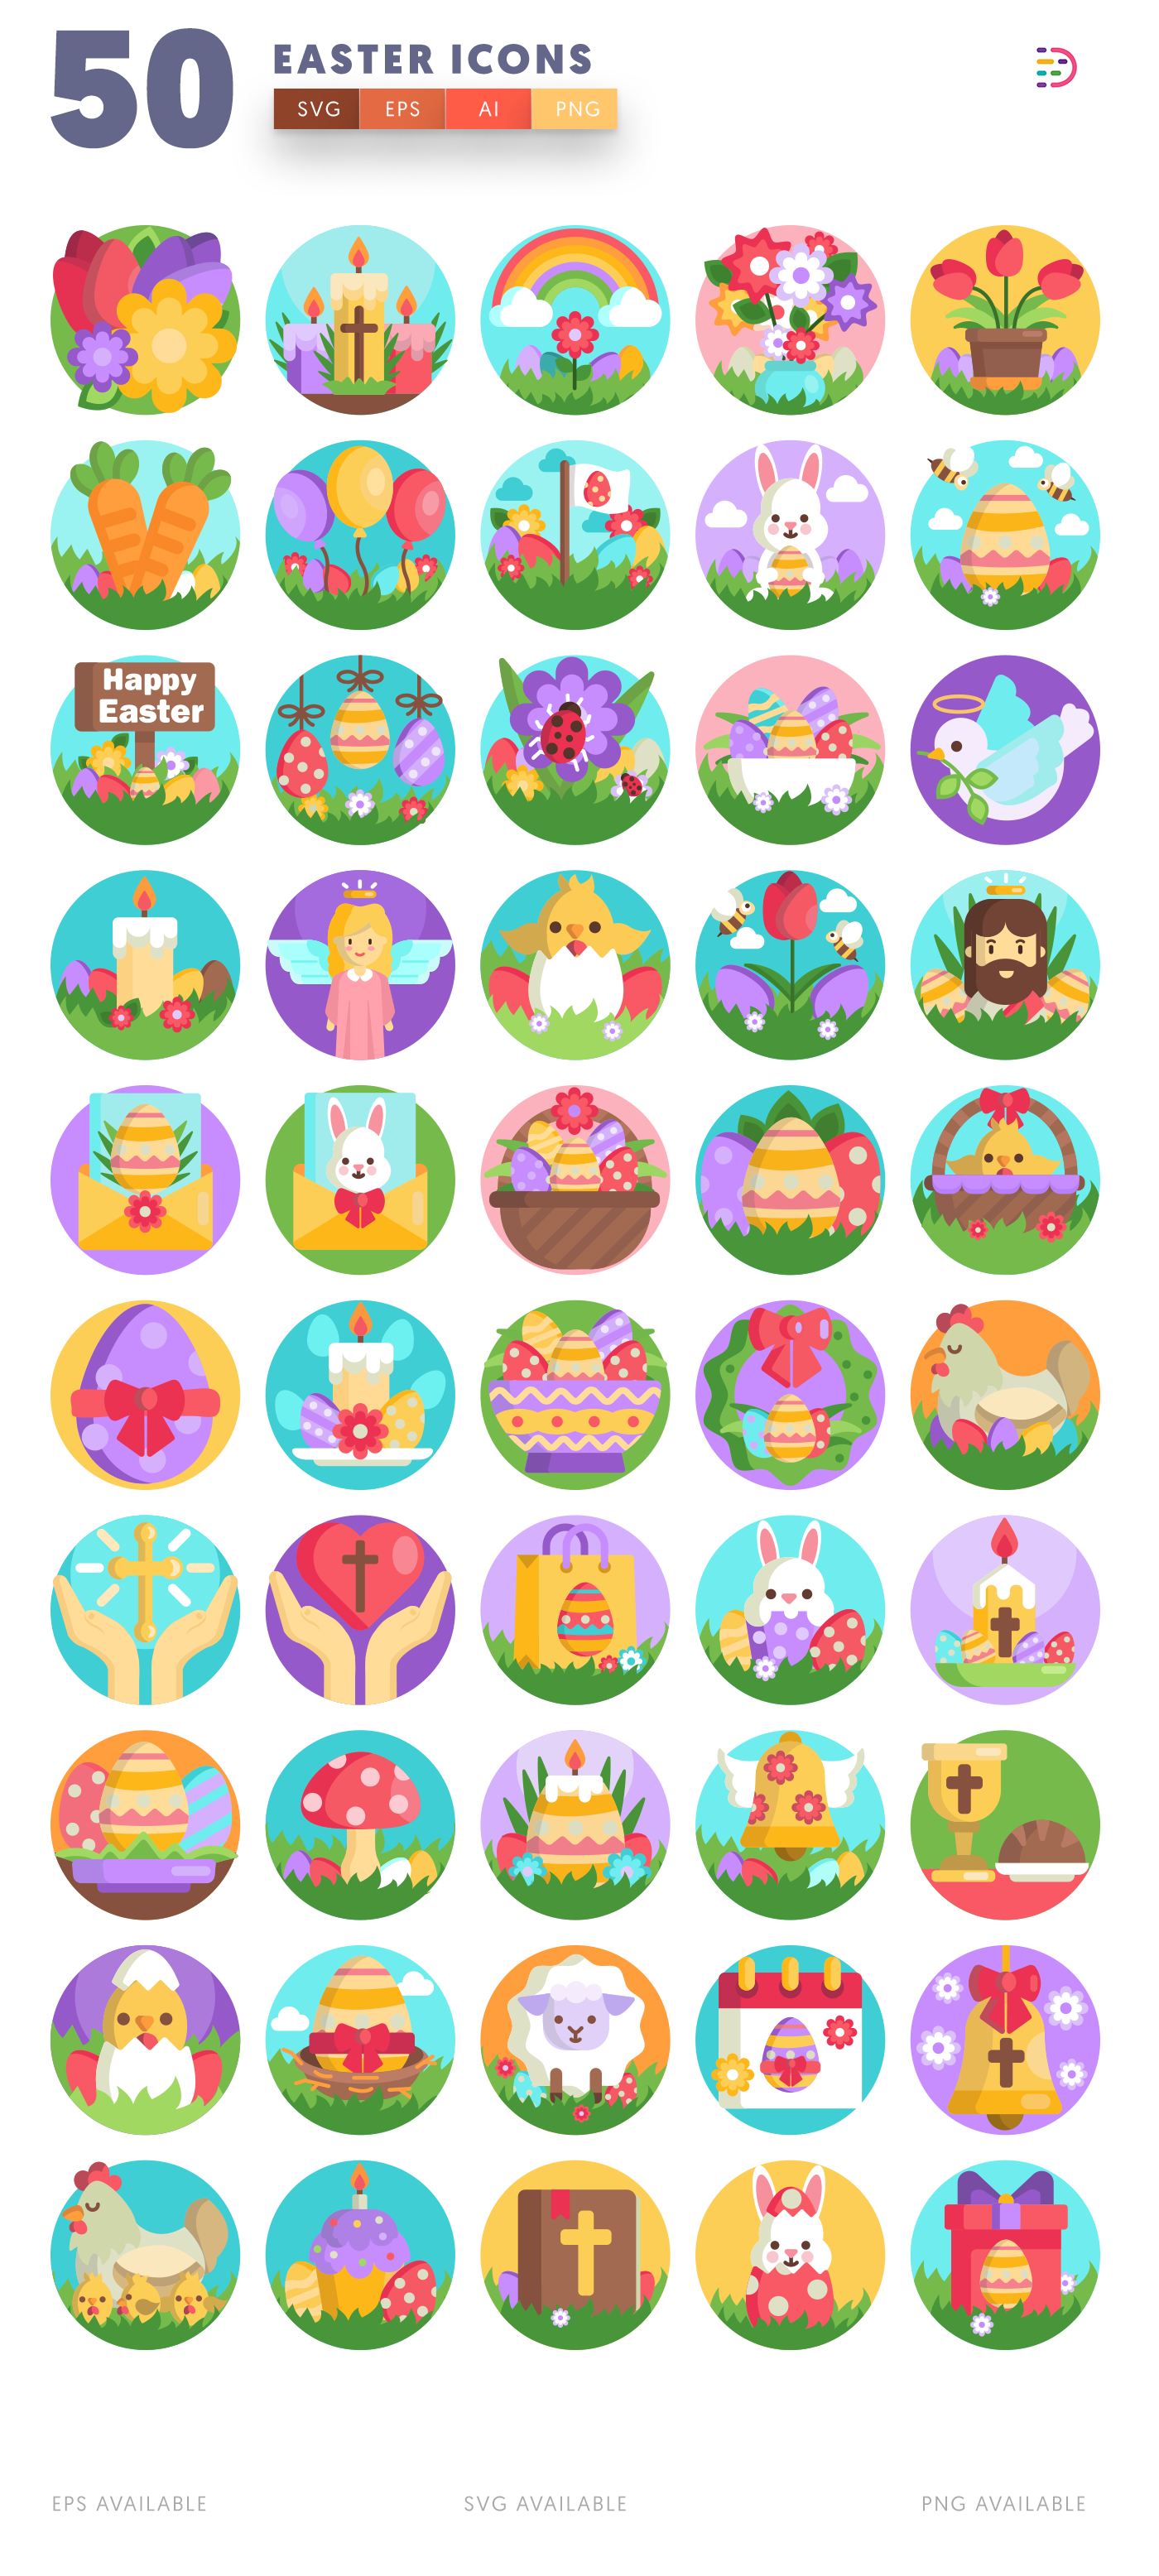 Design ready 50 Easter Icons